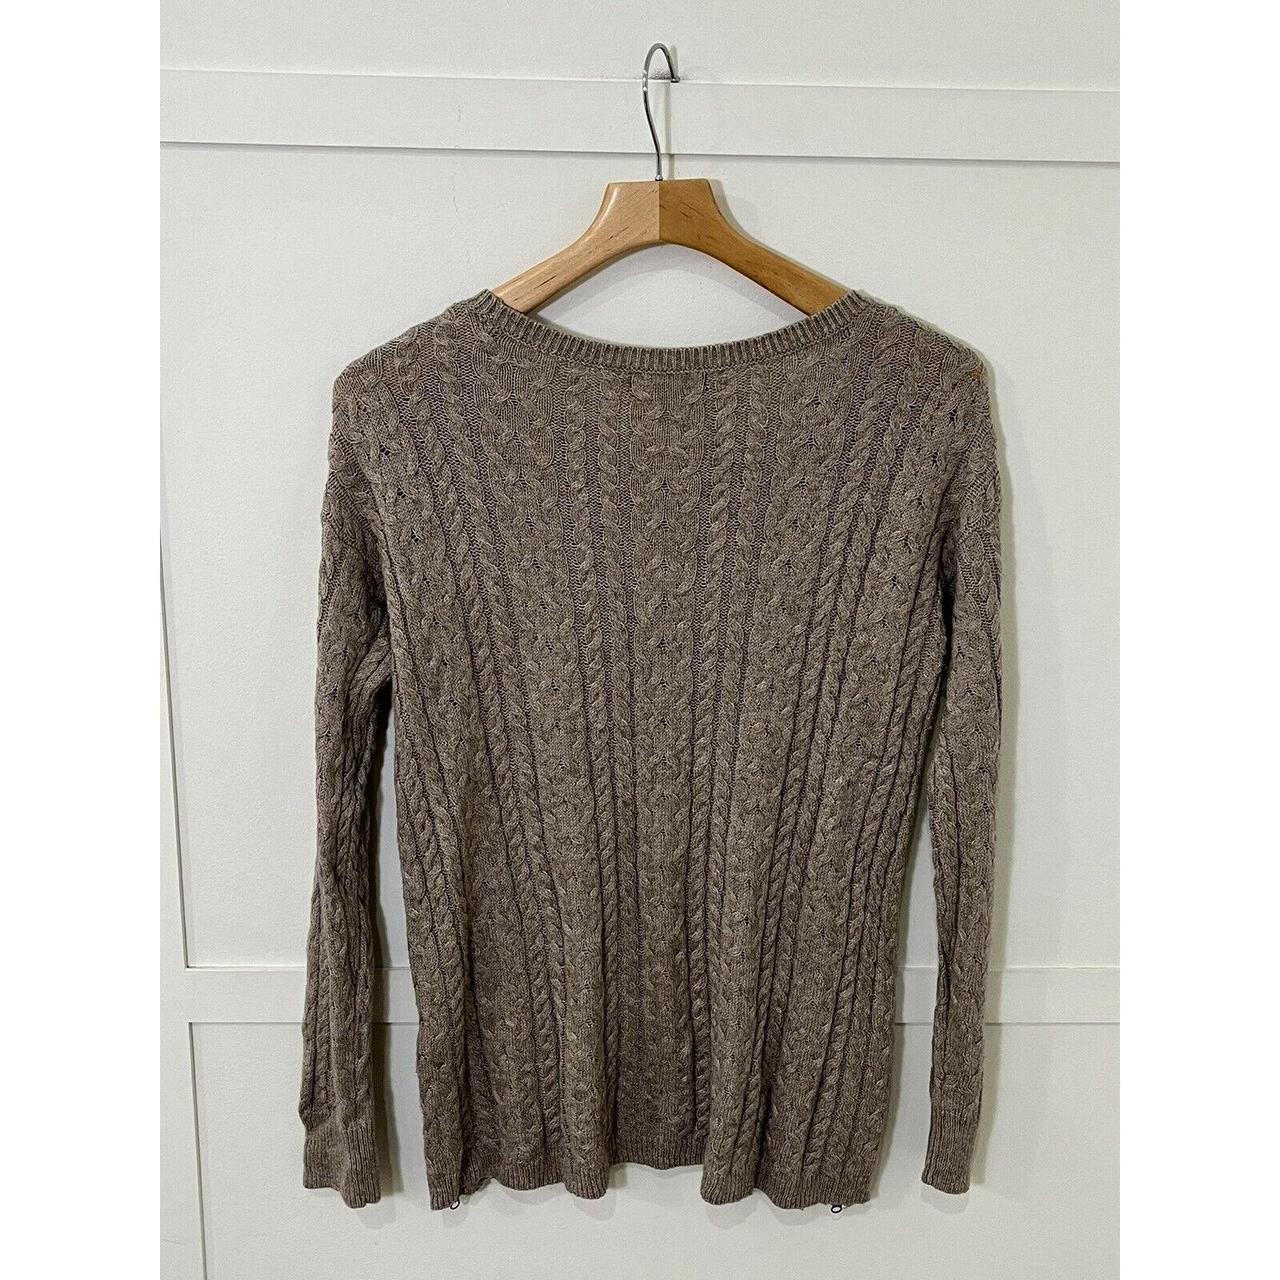 Product Image 2 - Womens American Eagle Sweater Sz